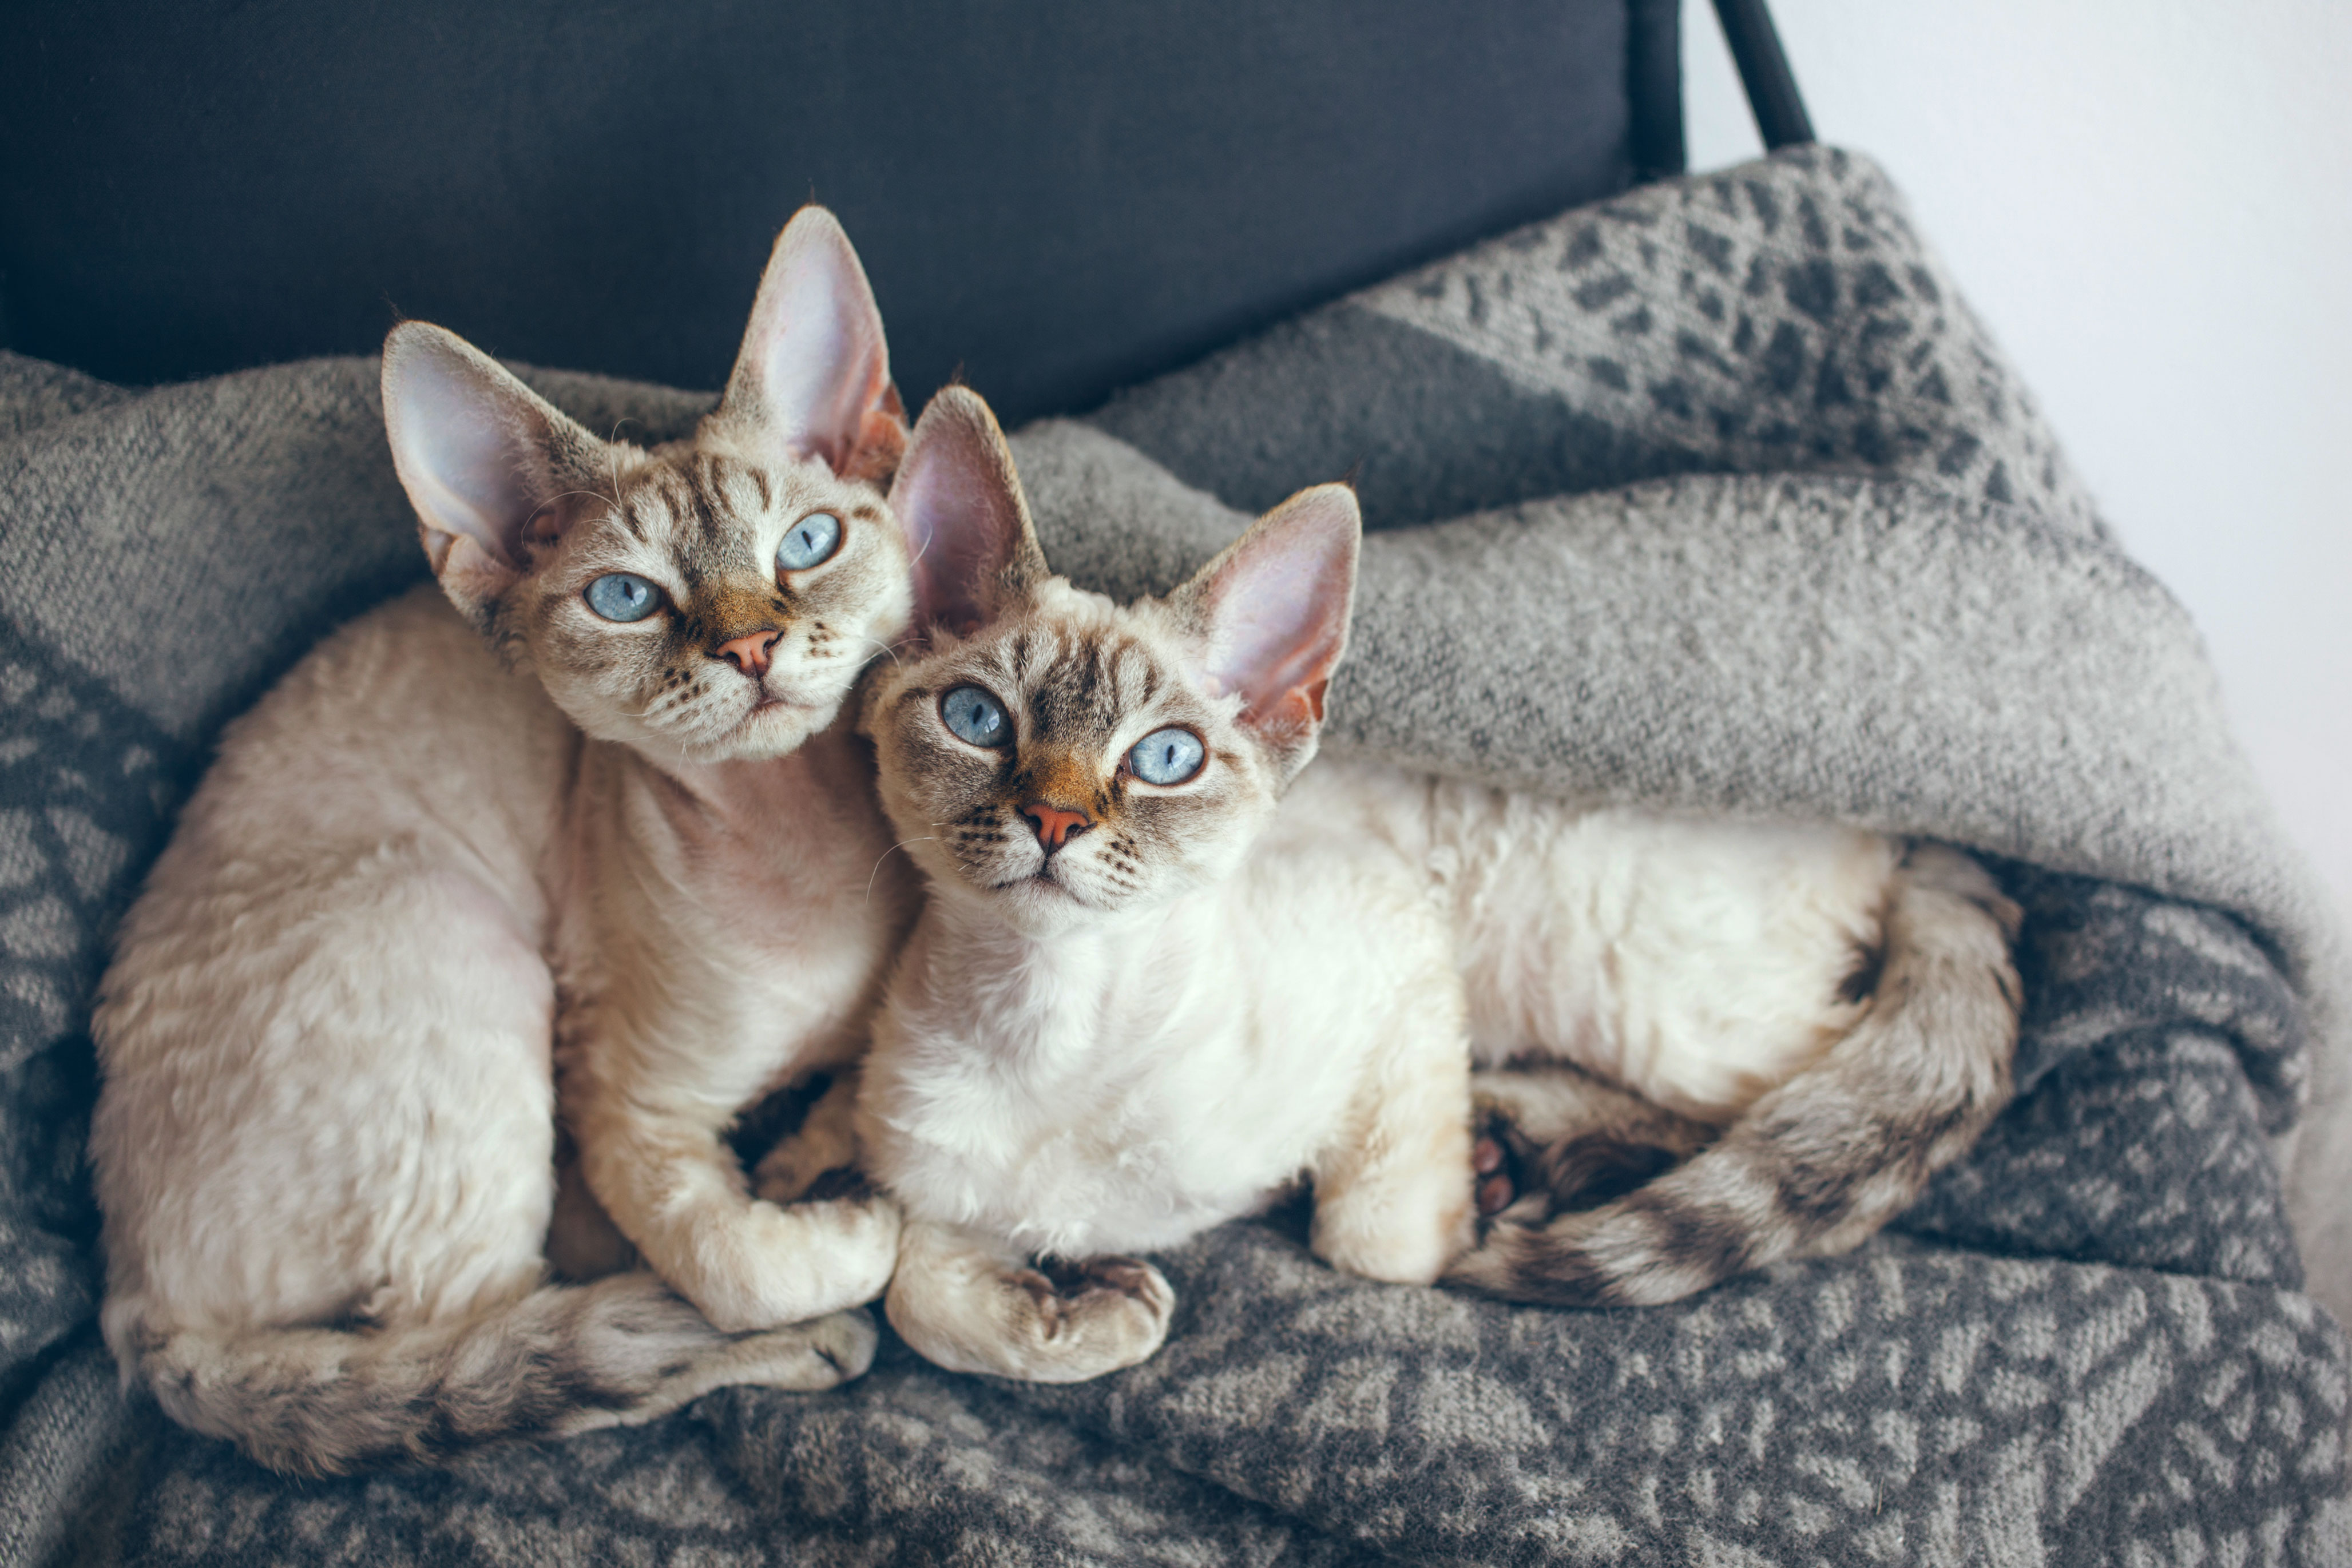 Two adorable Devon Rex cats with blue eyes sitting together